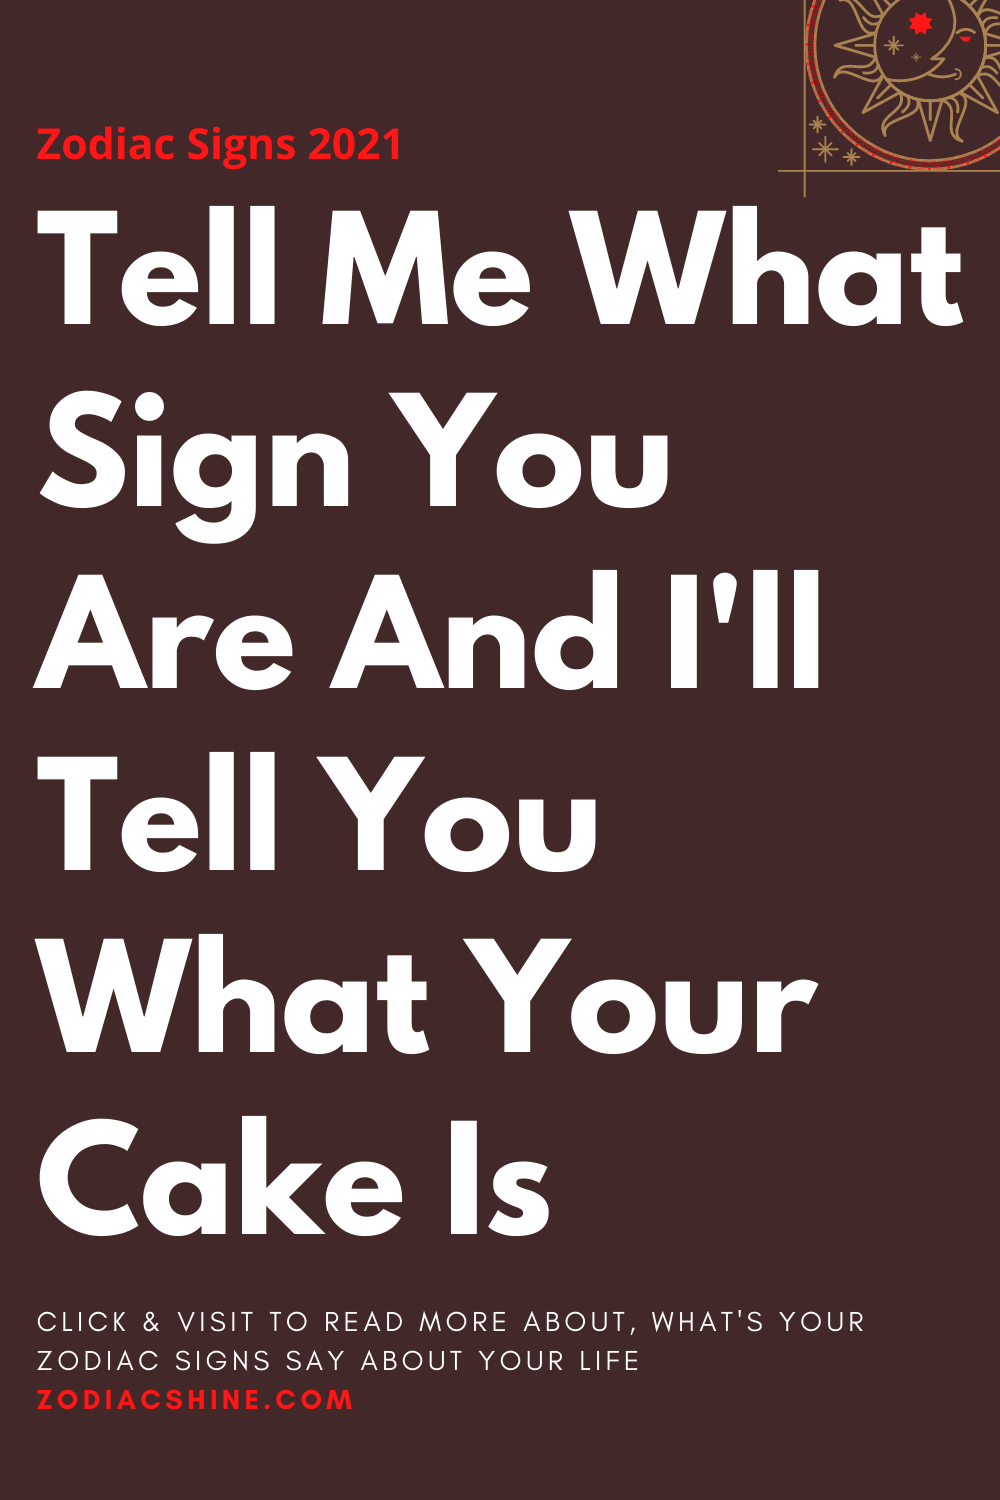 Tell Me What Sign You Are And I'll Tell You What Your Cake Is